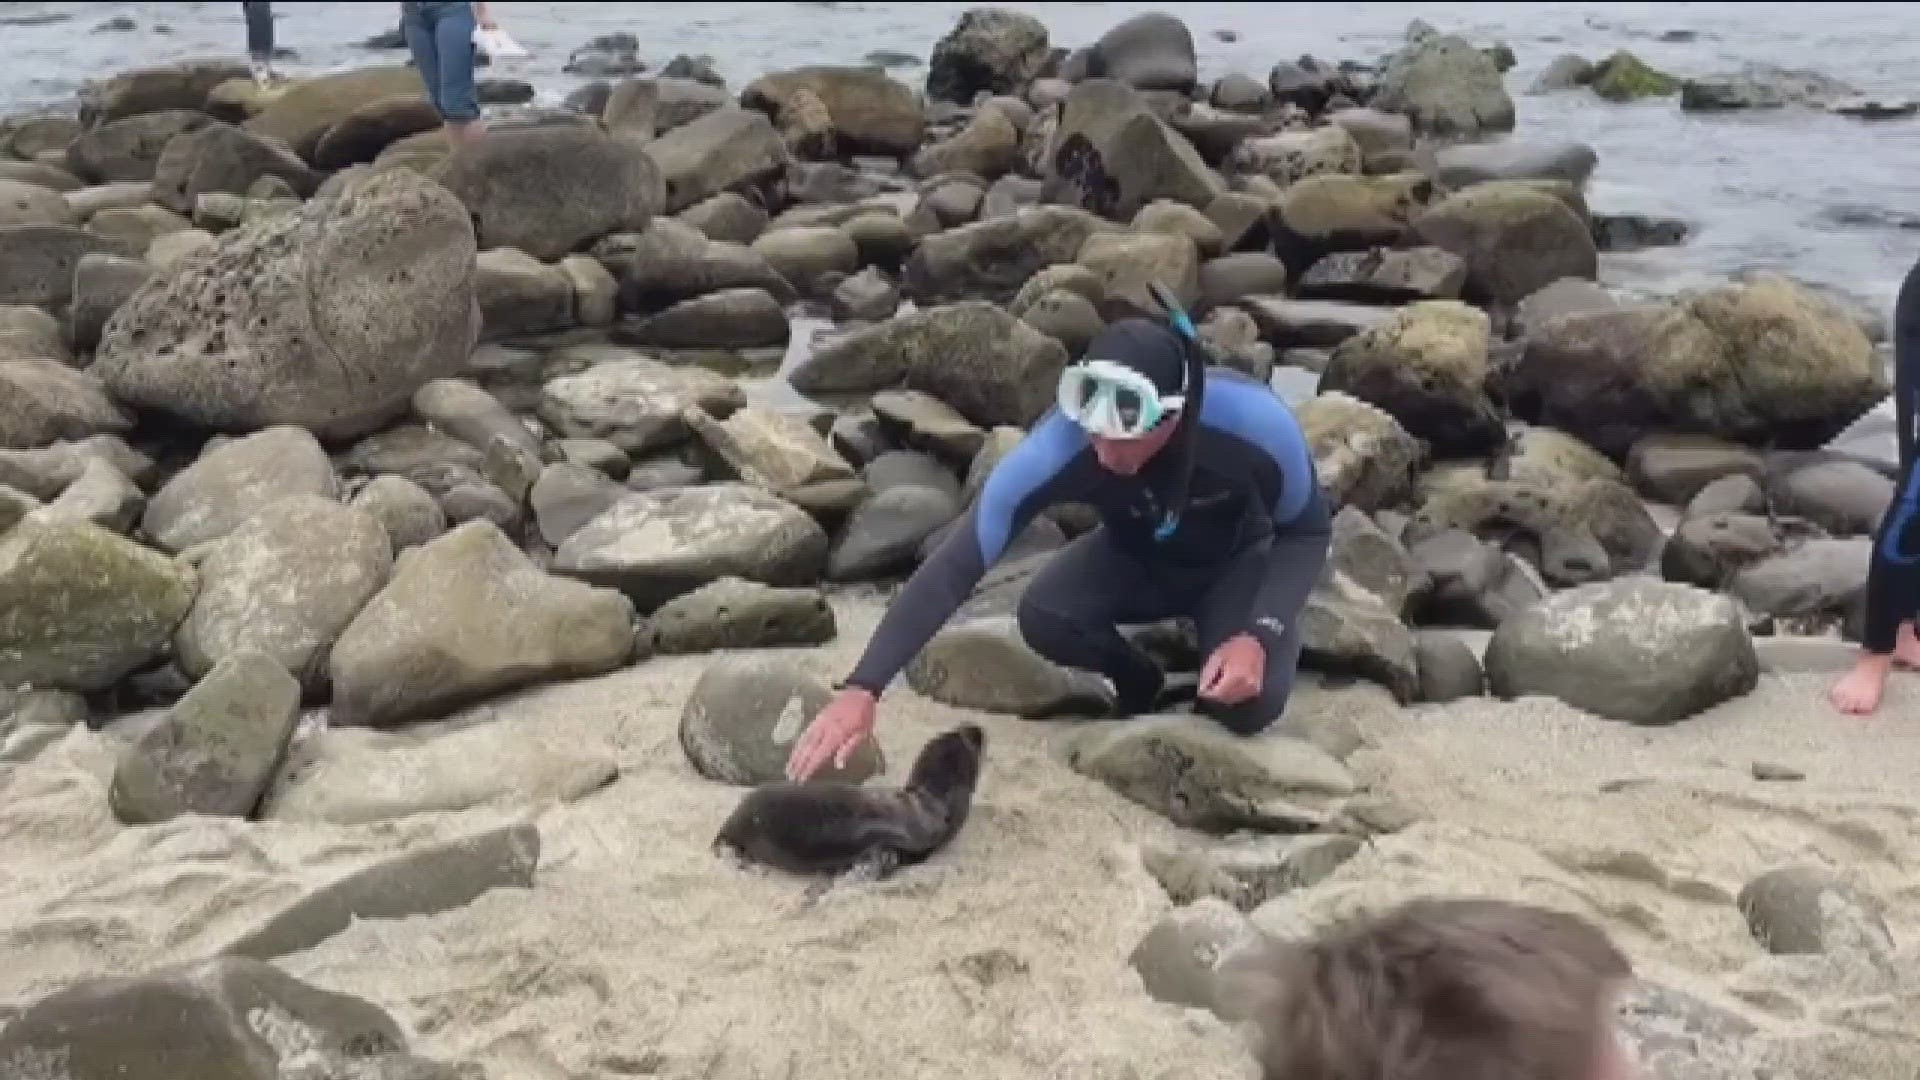 "I took a video today of a douche bag at La Jolla Cove petting a newborn sea lion after a bunch of people told him not to," a concerned citizen told CBS 8.